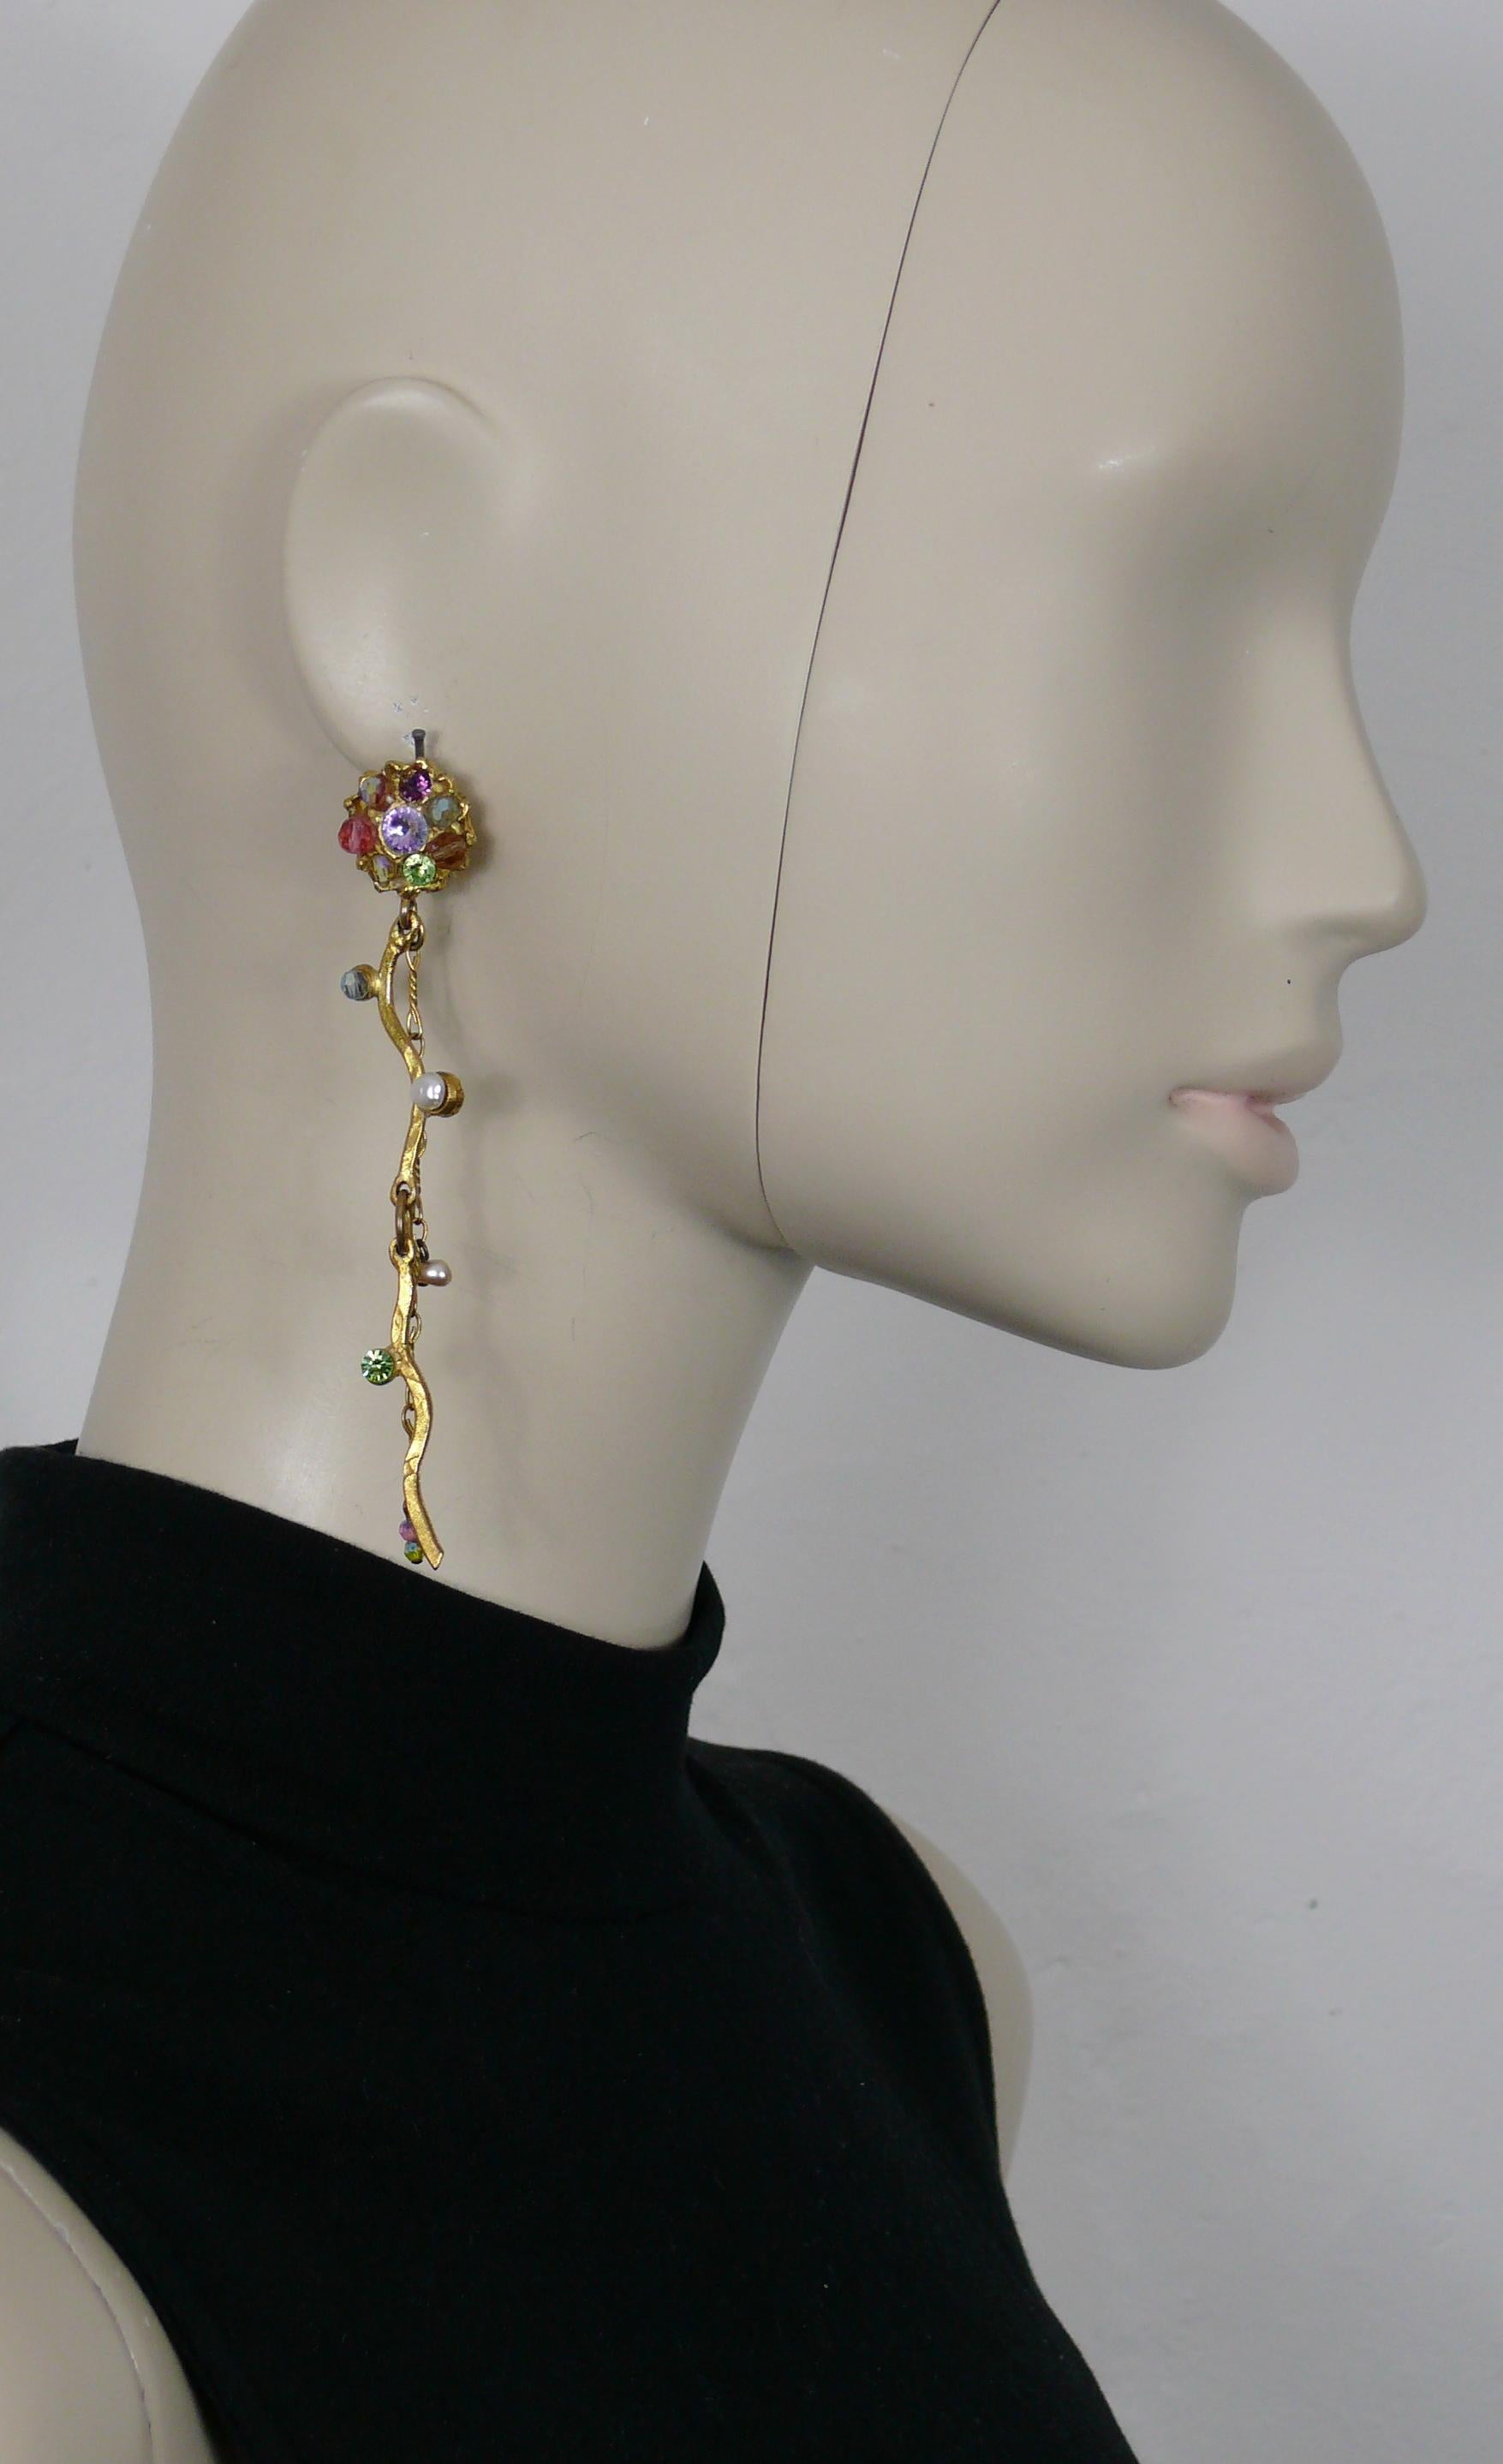 CHRISTIAN LACROIX vintage gold toned clip-on dangling earrings embellished with multicolored crystals, facetted glass beads and faux pearls.

Marked CHRISTIAN LACROIX CL Made in France.

Indicative measurements : max. height approx. 10 cm (3.94